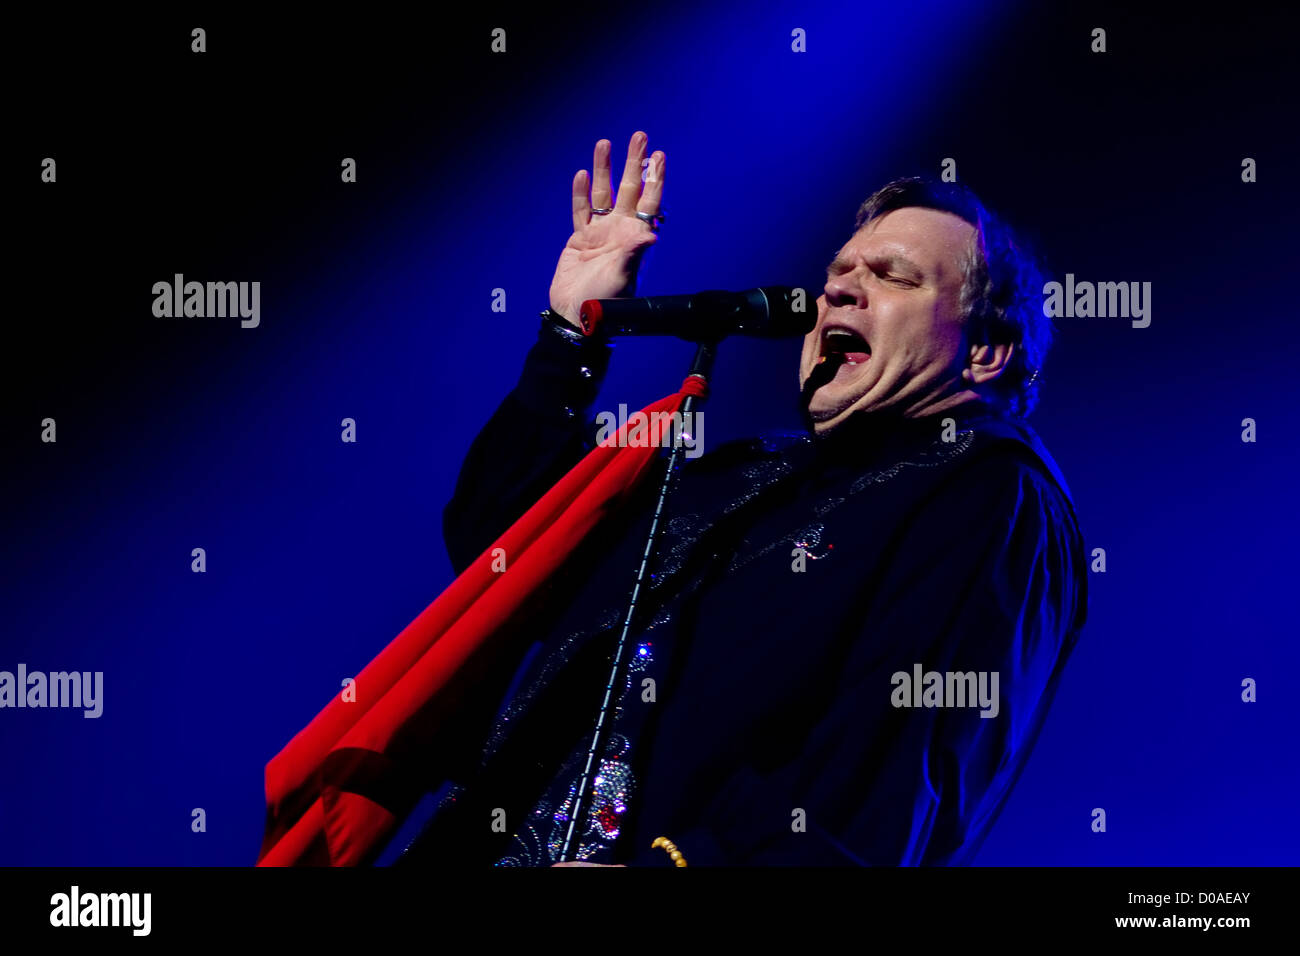 Meat Loaf performing live at Wembley Arena London, England - 07.12.10 Stock Photo